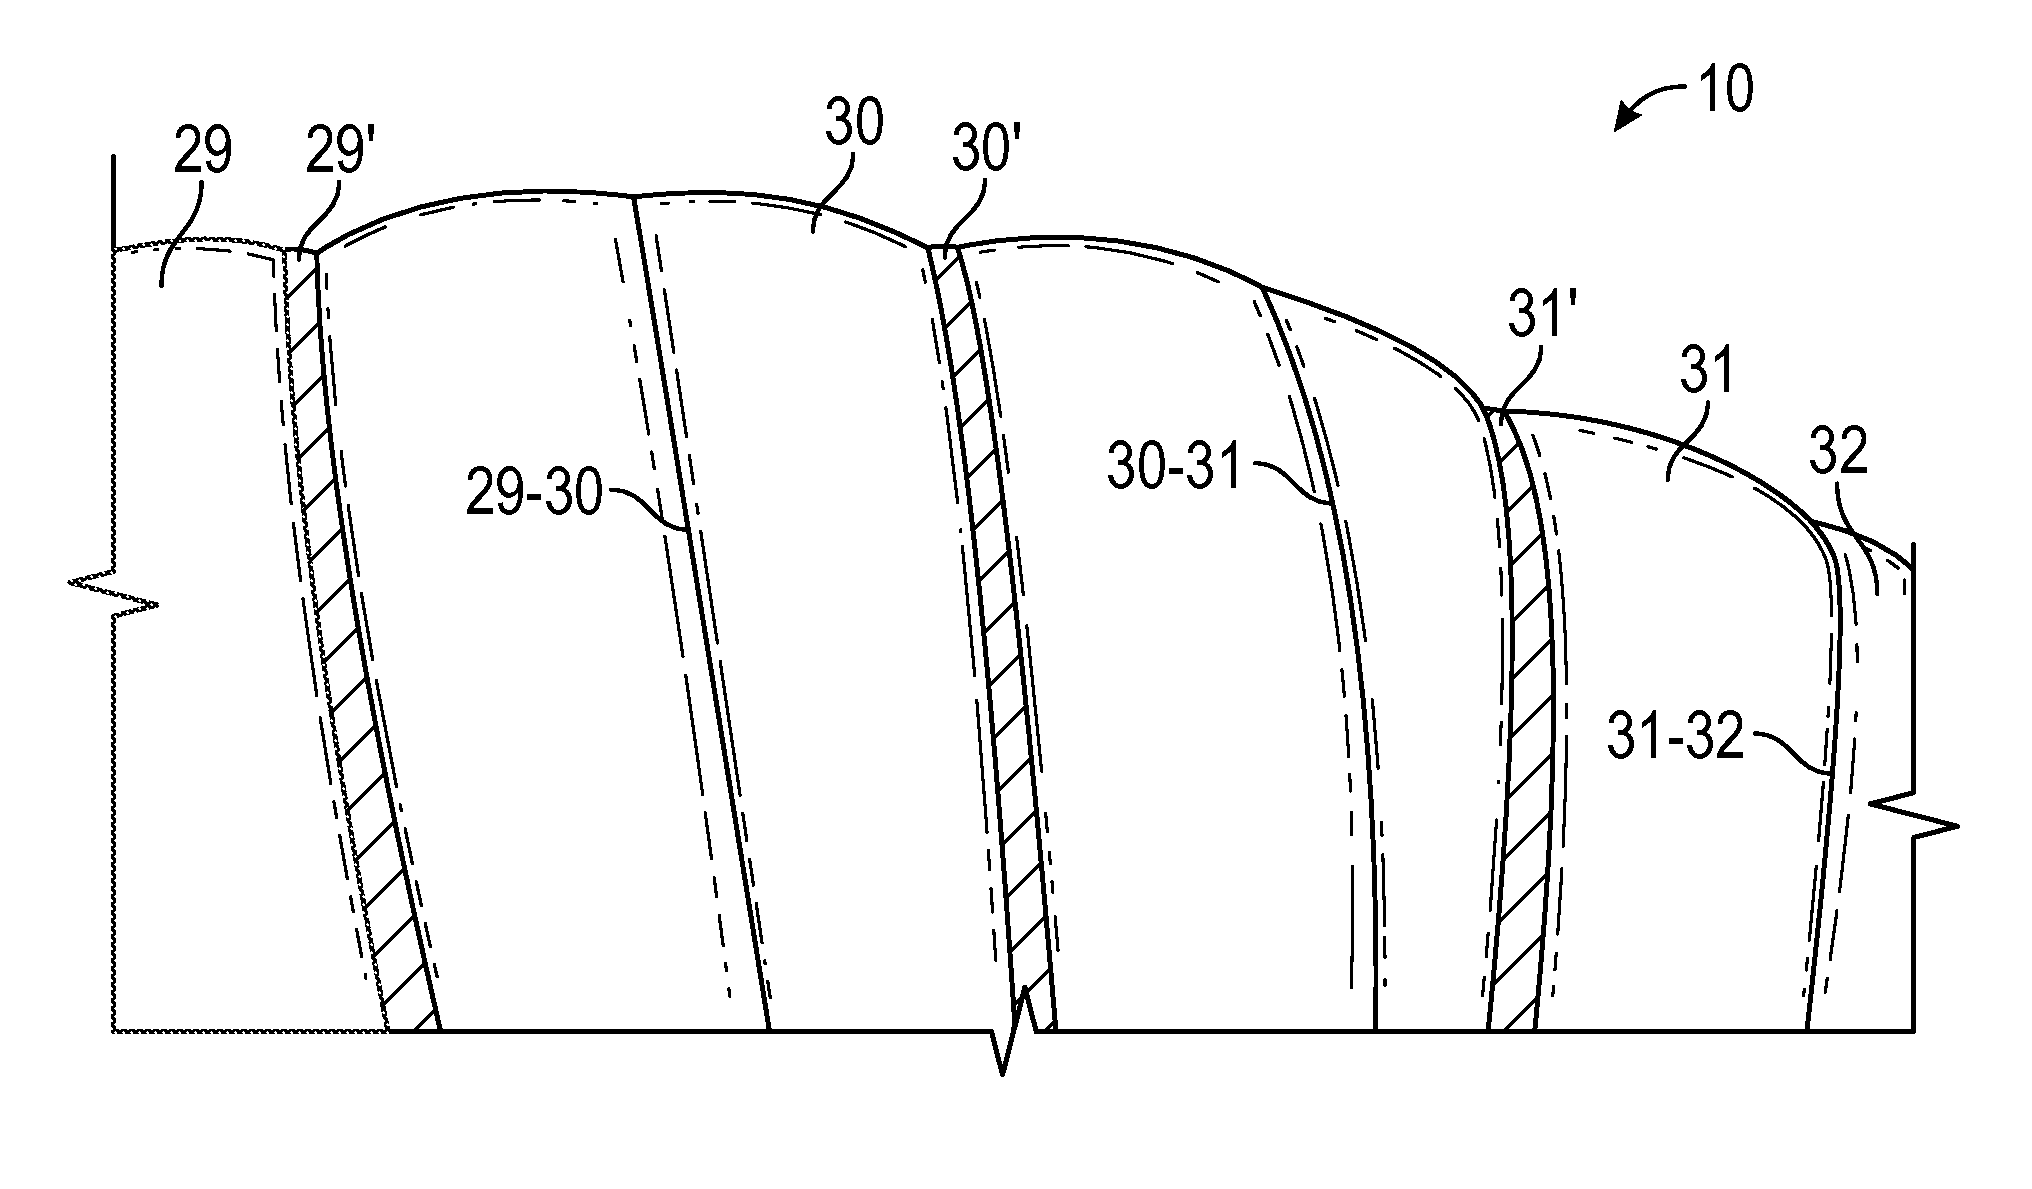 Superpressure polyethylene balloon with load tapes